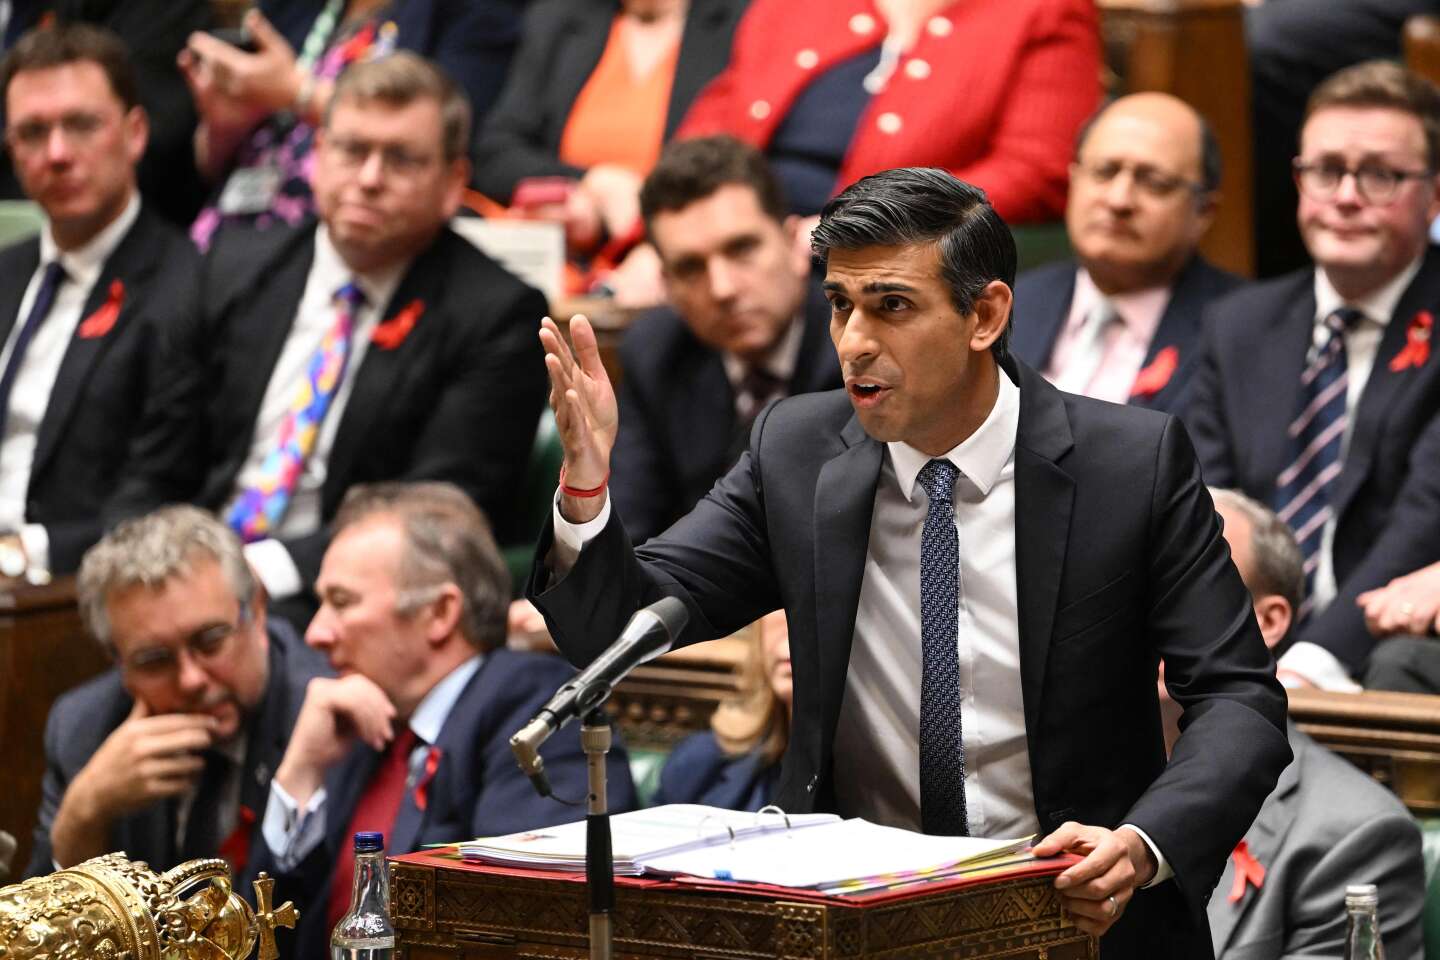 In the United Kingdom, Rishi Sunak is the leader of the Conservative Party in rebellion